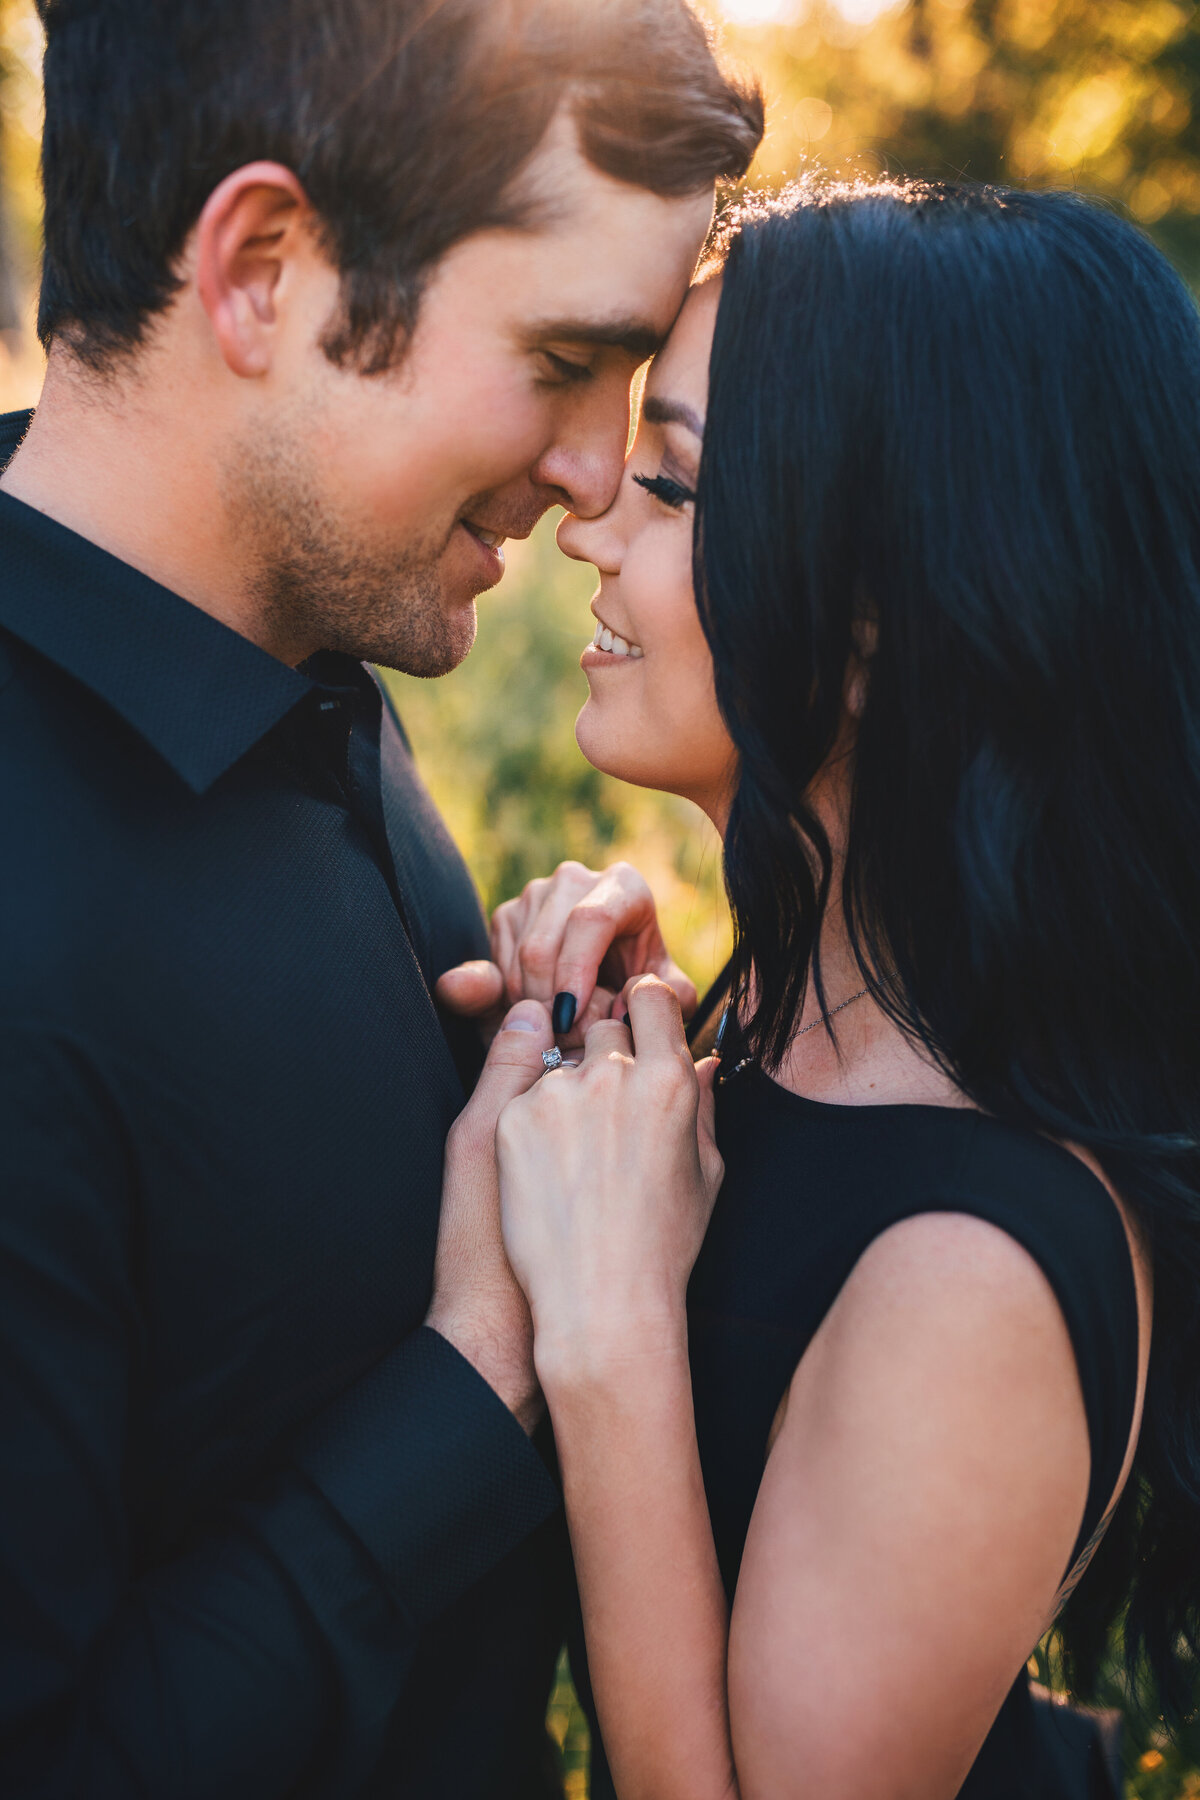 WhitneyBairdPhotography_Jess&AldoEngagement2021_237r